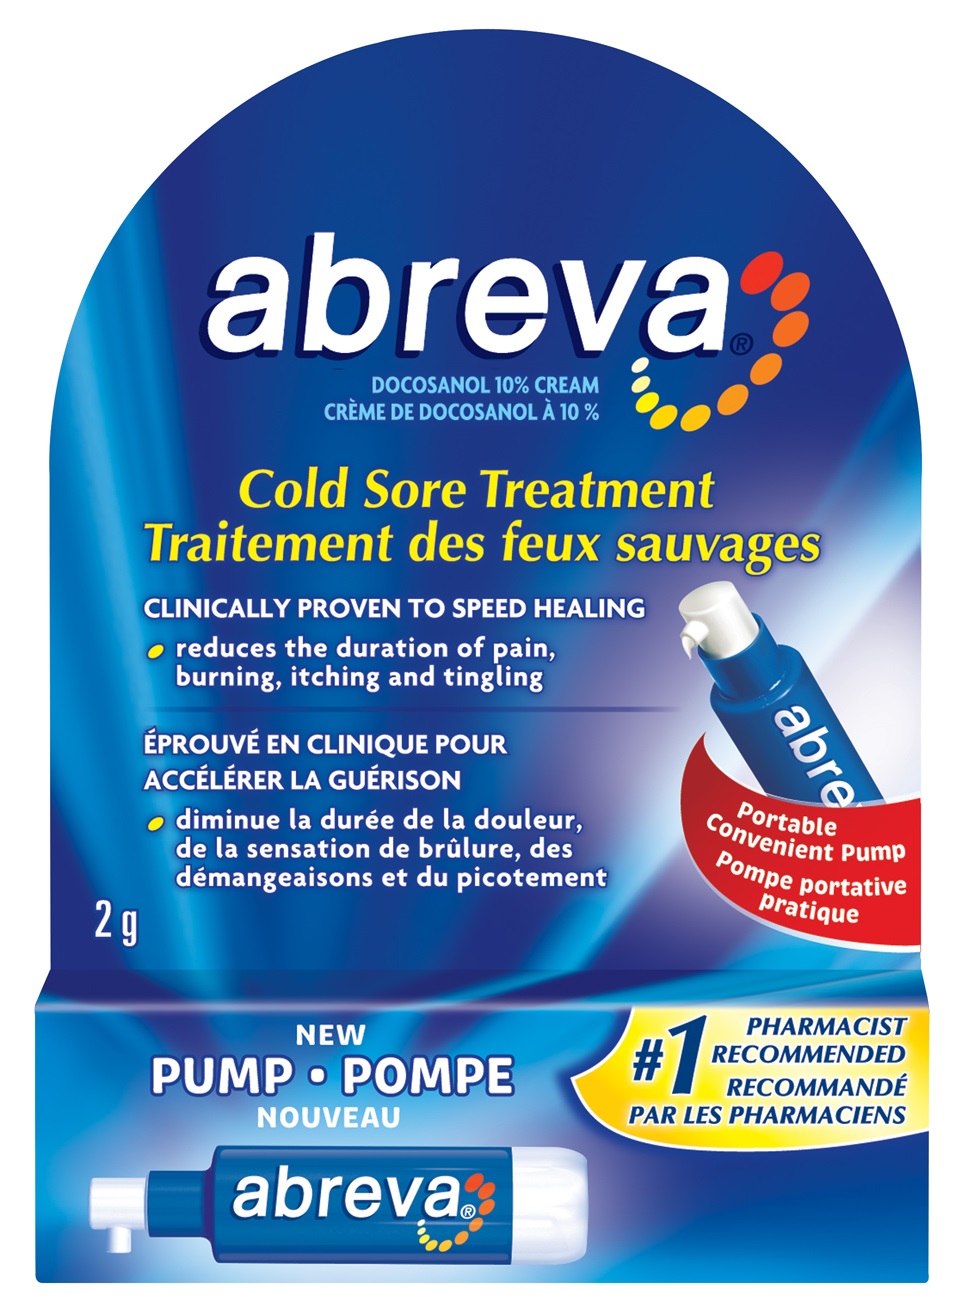 Buy Abreva Cold Sore Treatment at Well.ca Free Shipping